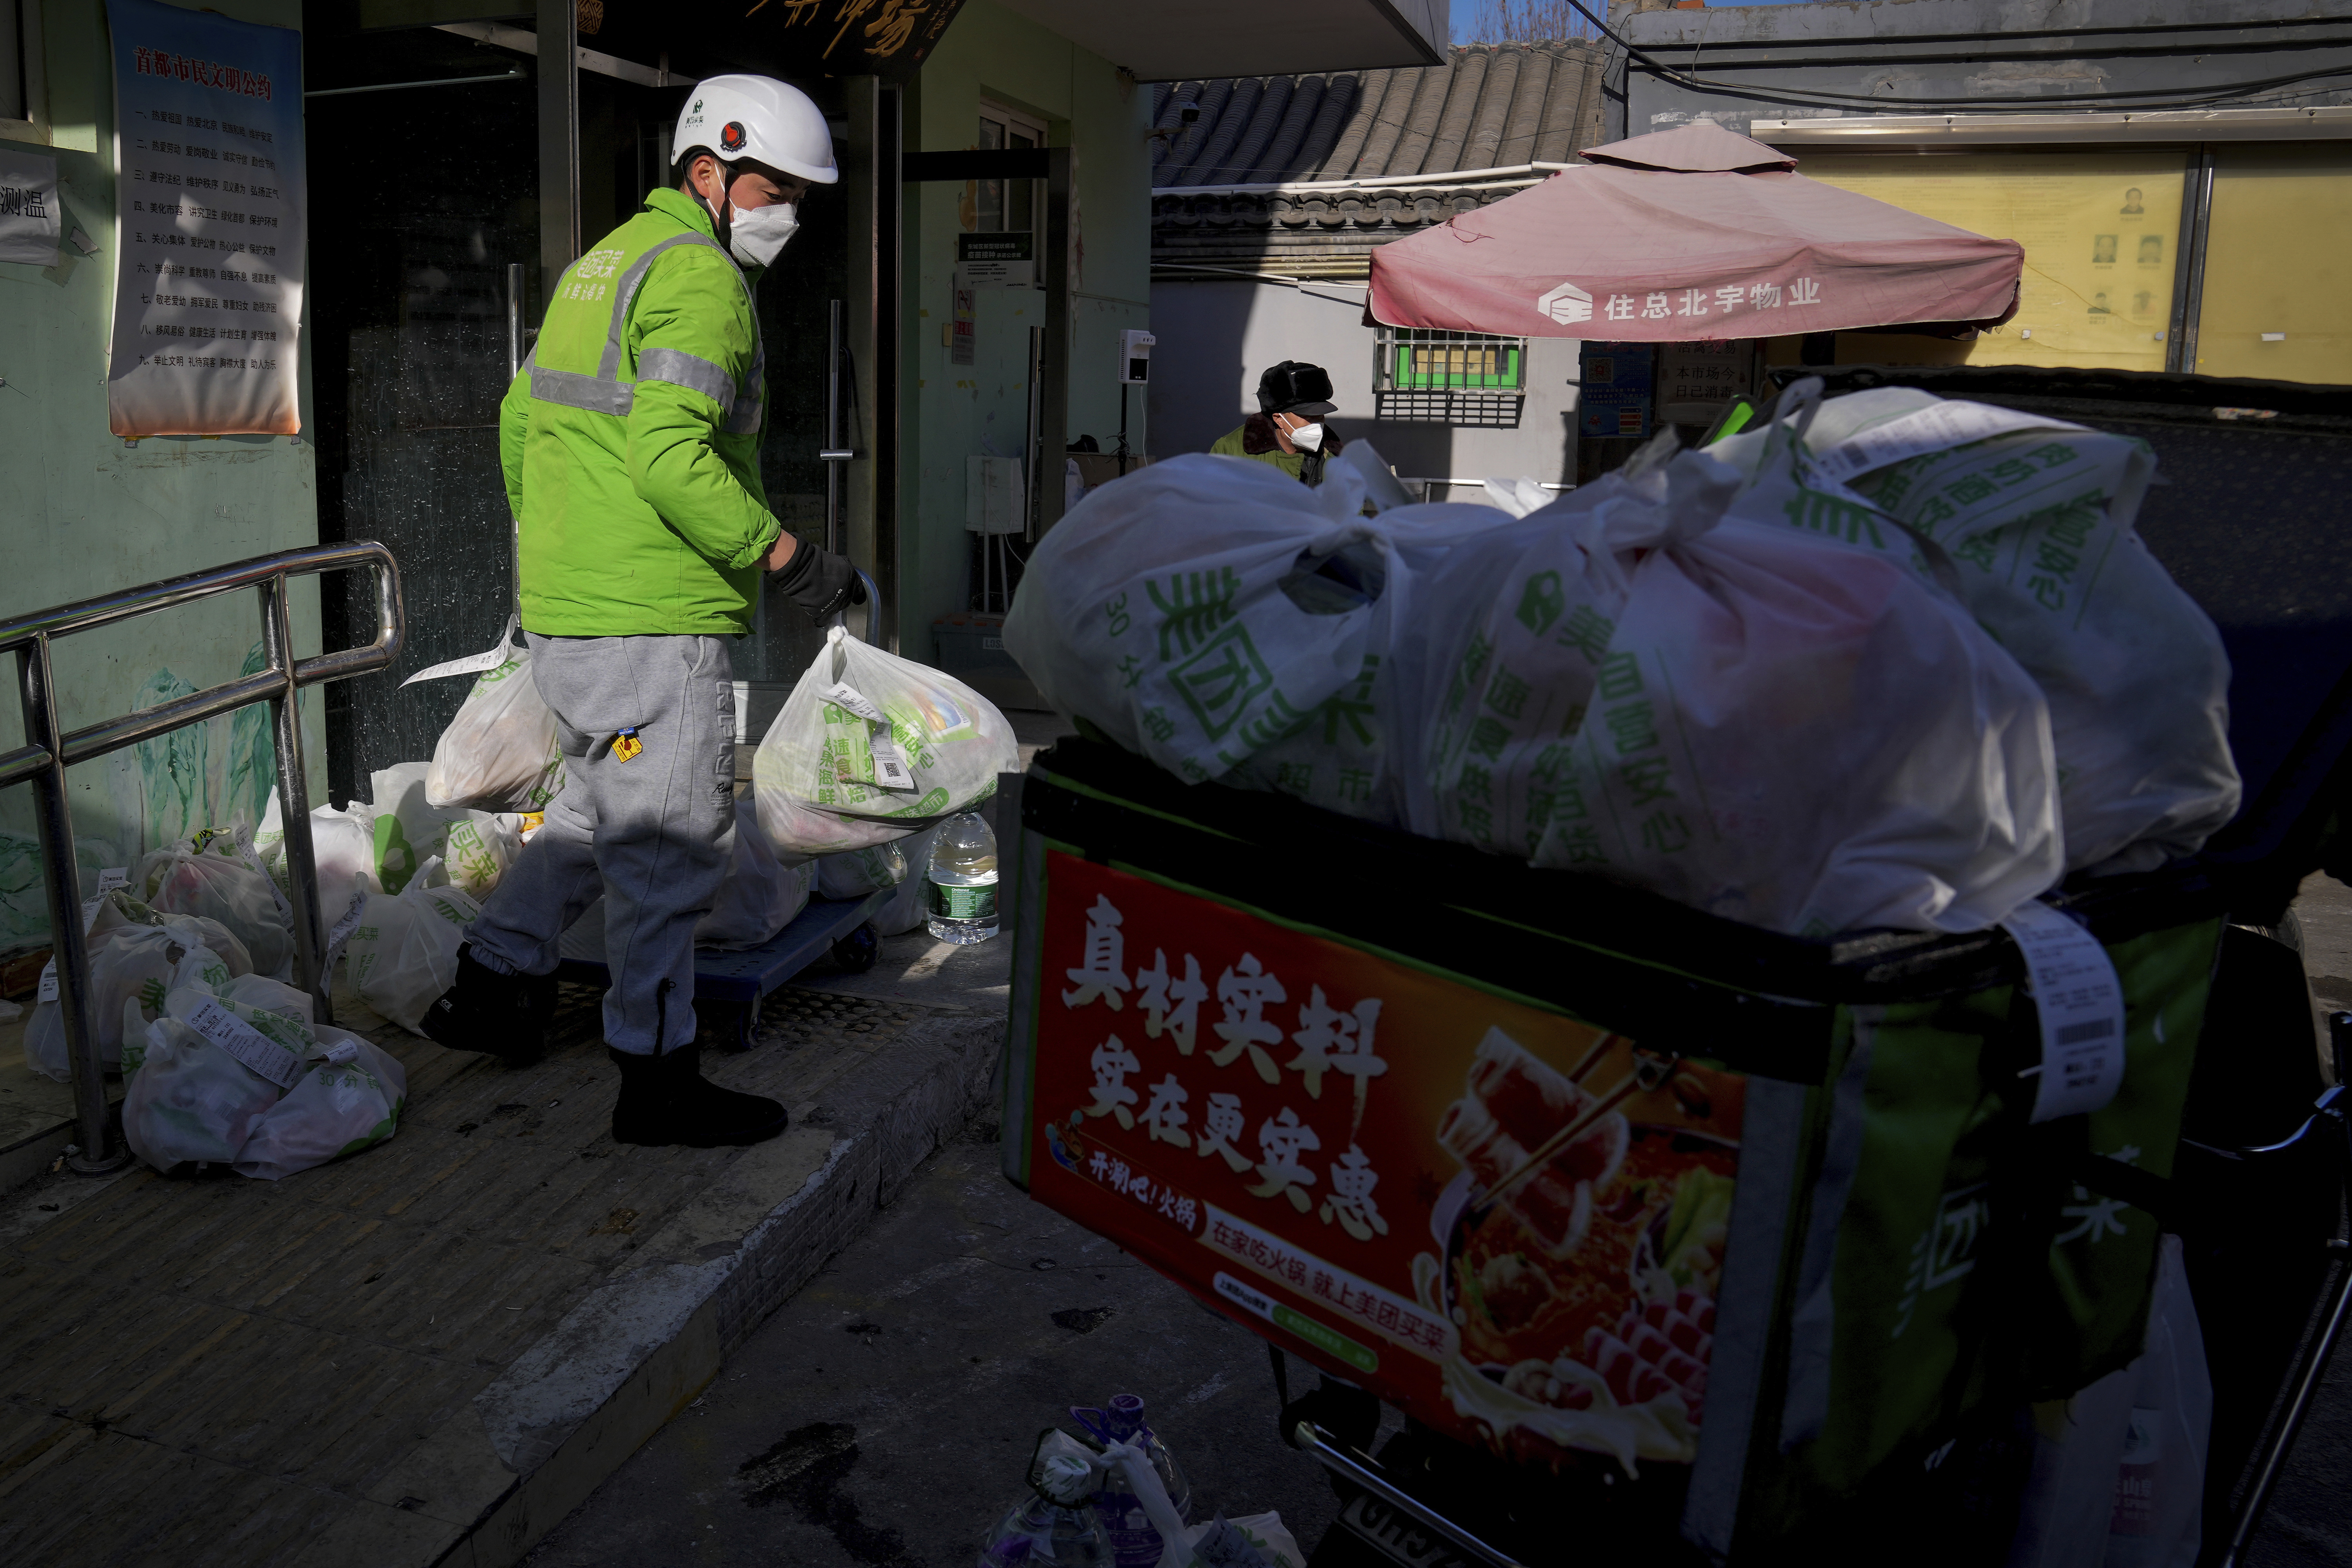 A delivery rider collects bags of online grocery orders as a surge of COVID-19 cases is causing a shortage of delivery workers in Beijing, Sunday, Dec. 18, 2022. (AP Photo/Andy Wong)